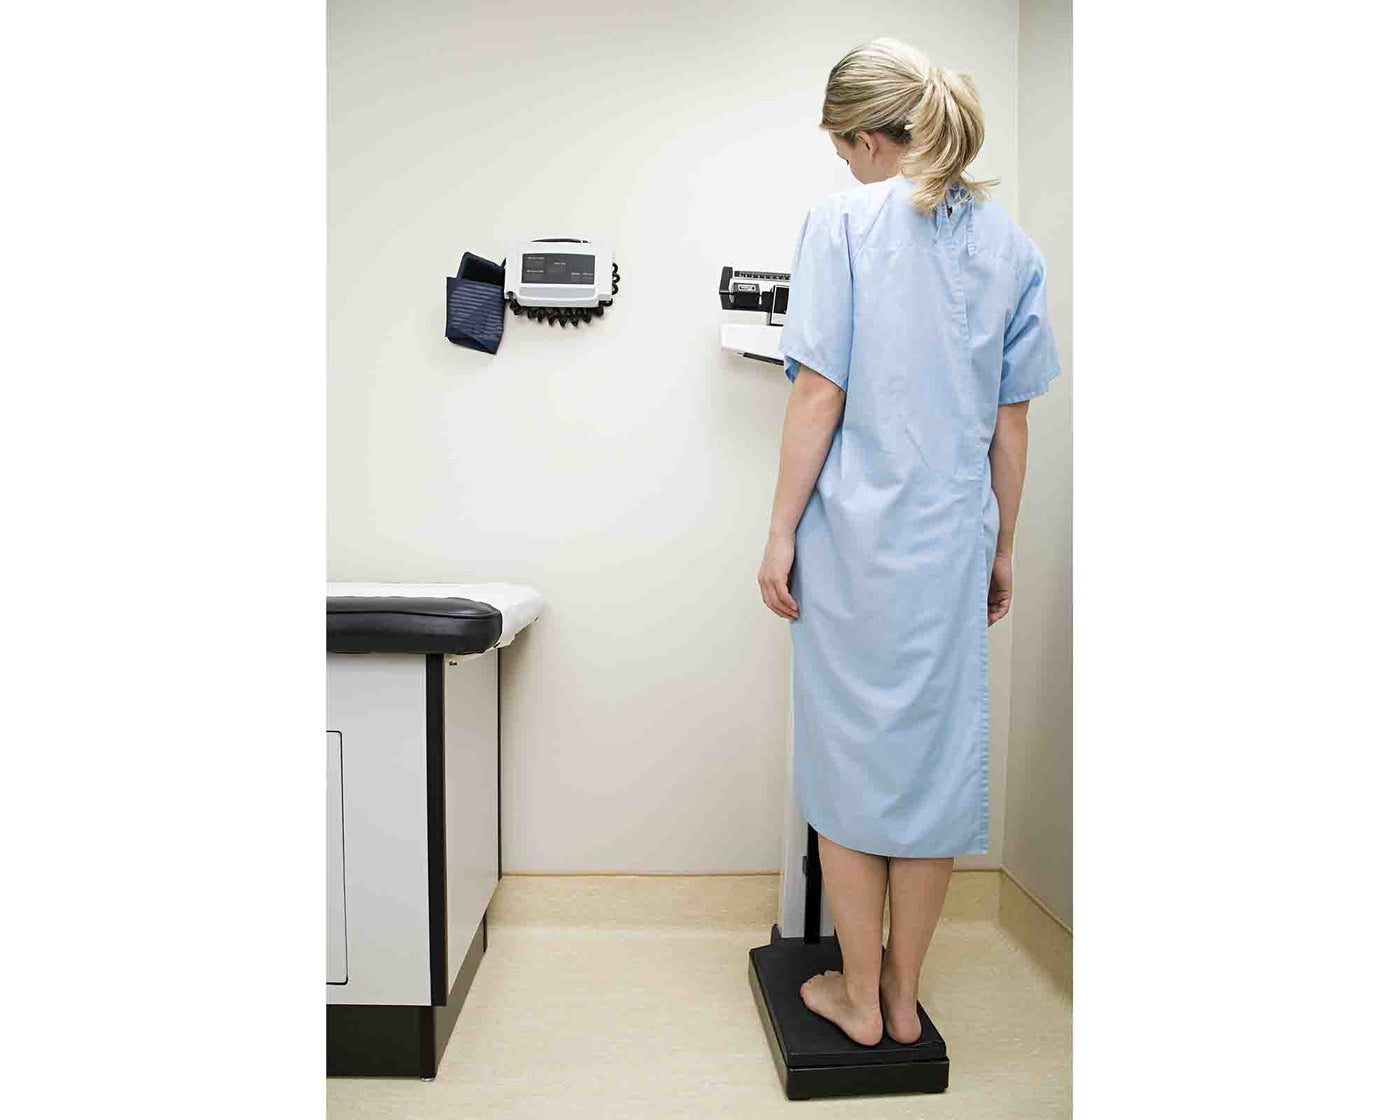 lady weighing herself, wearing light blue patient gown